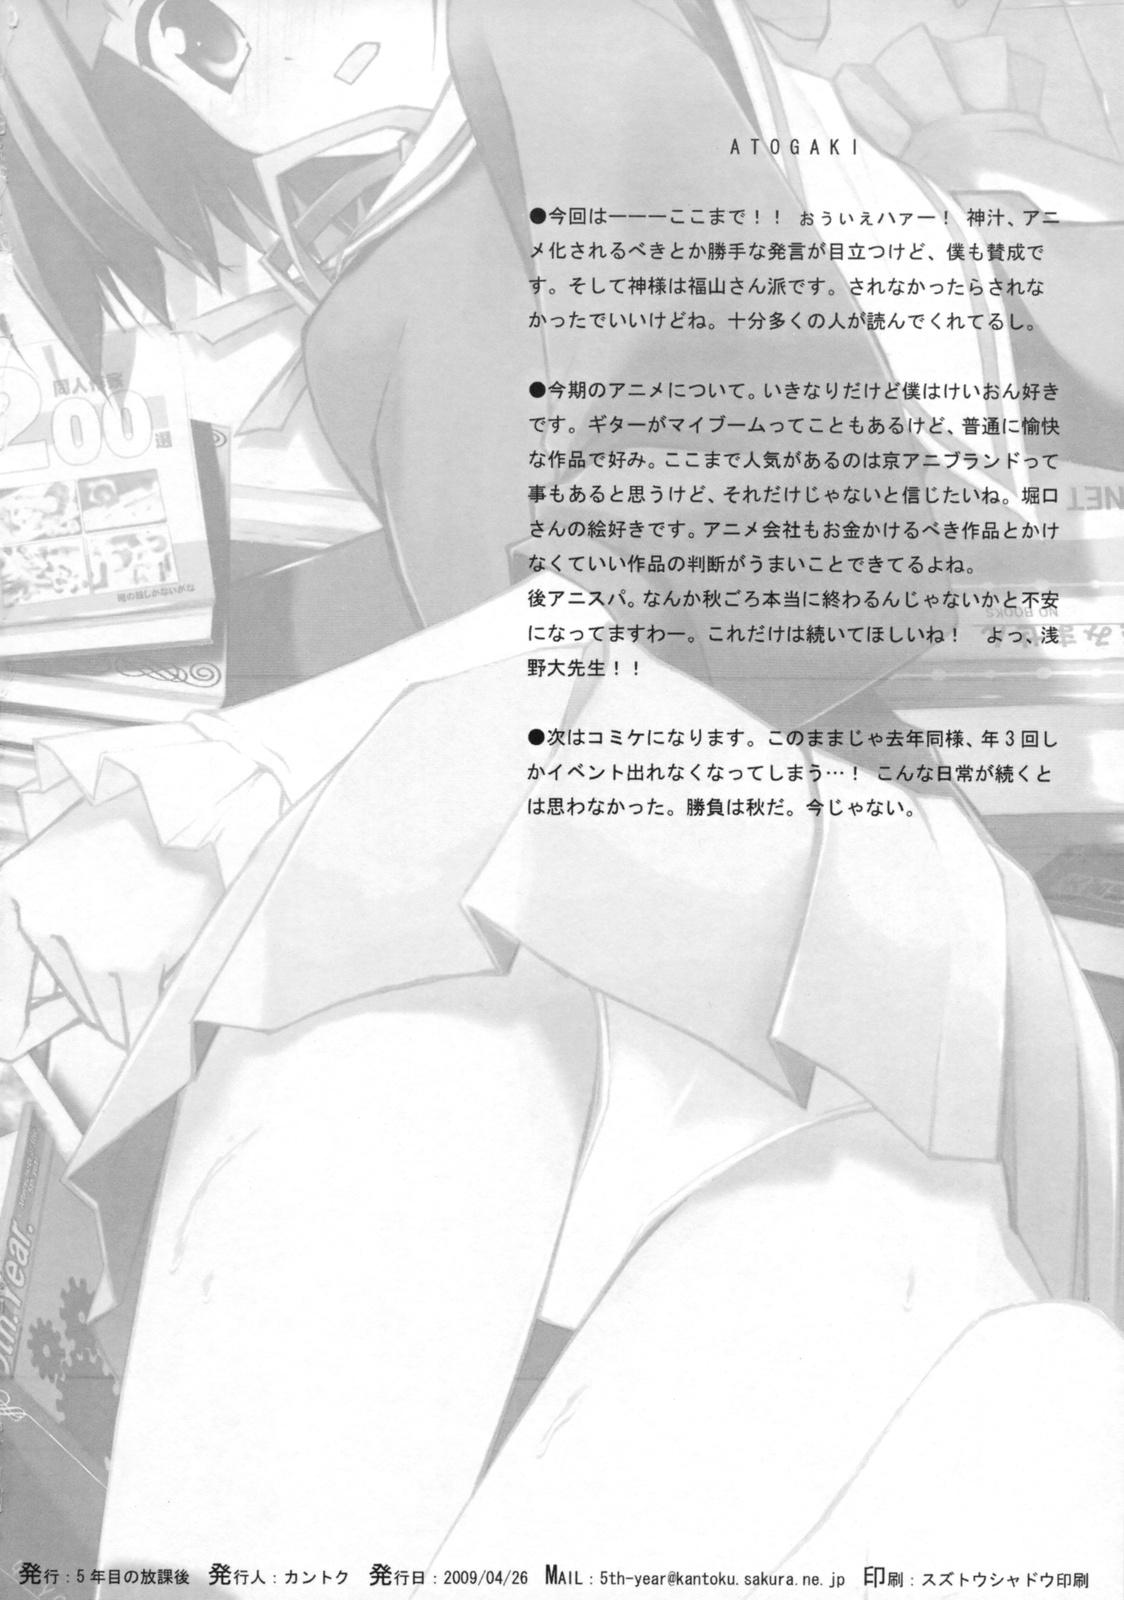 Teensnow Tachiyomi Senyou Vol. 28 - The world god only knows Handsome - Page 21